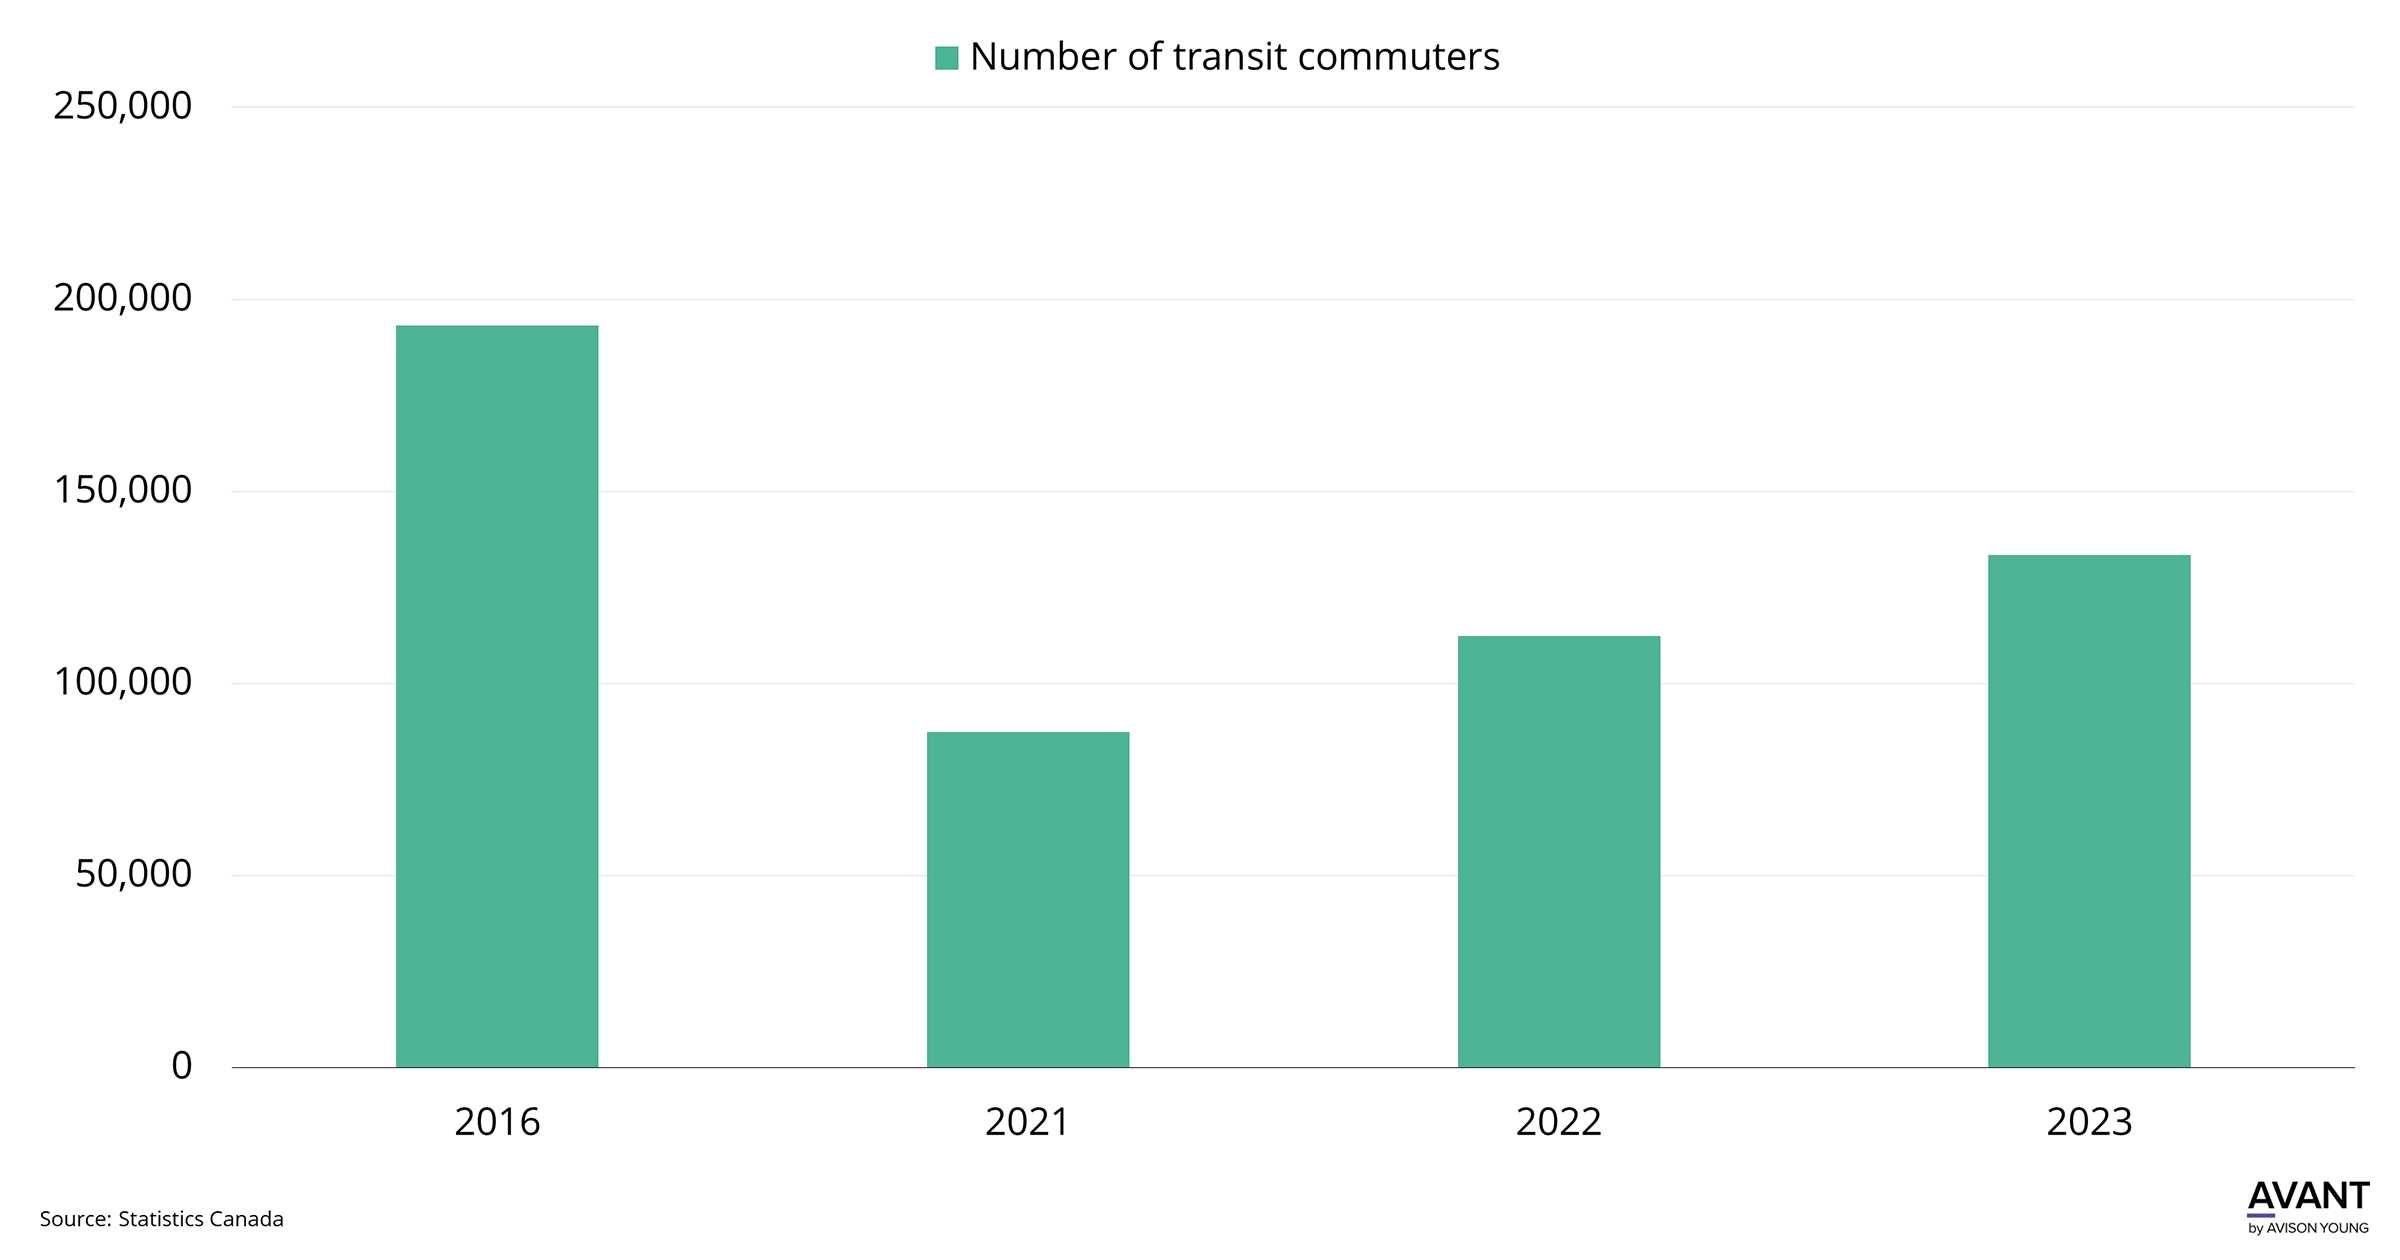 Number of transit commuters on the rise in Alberta